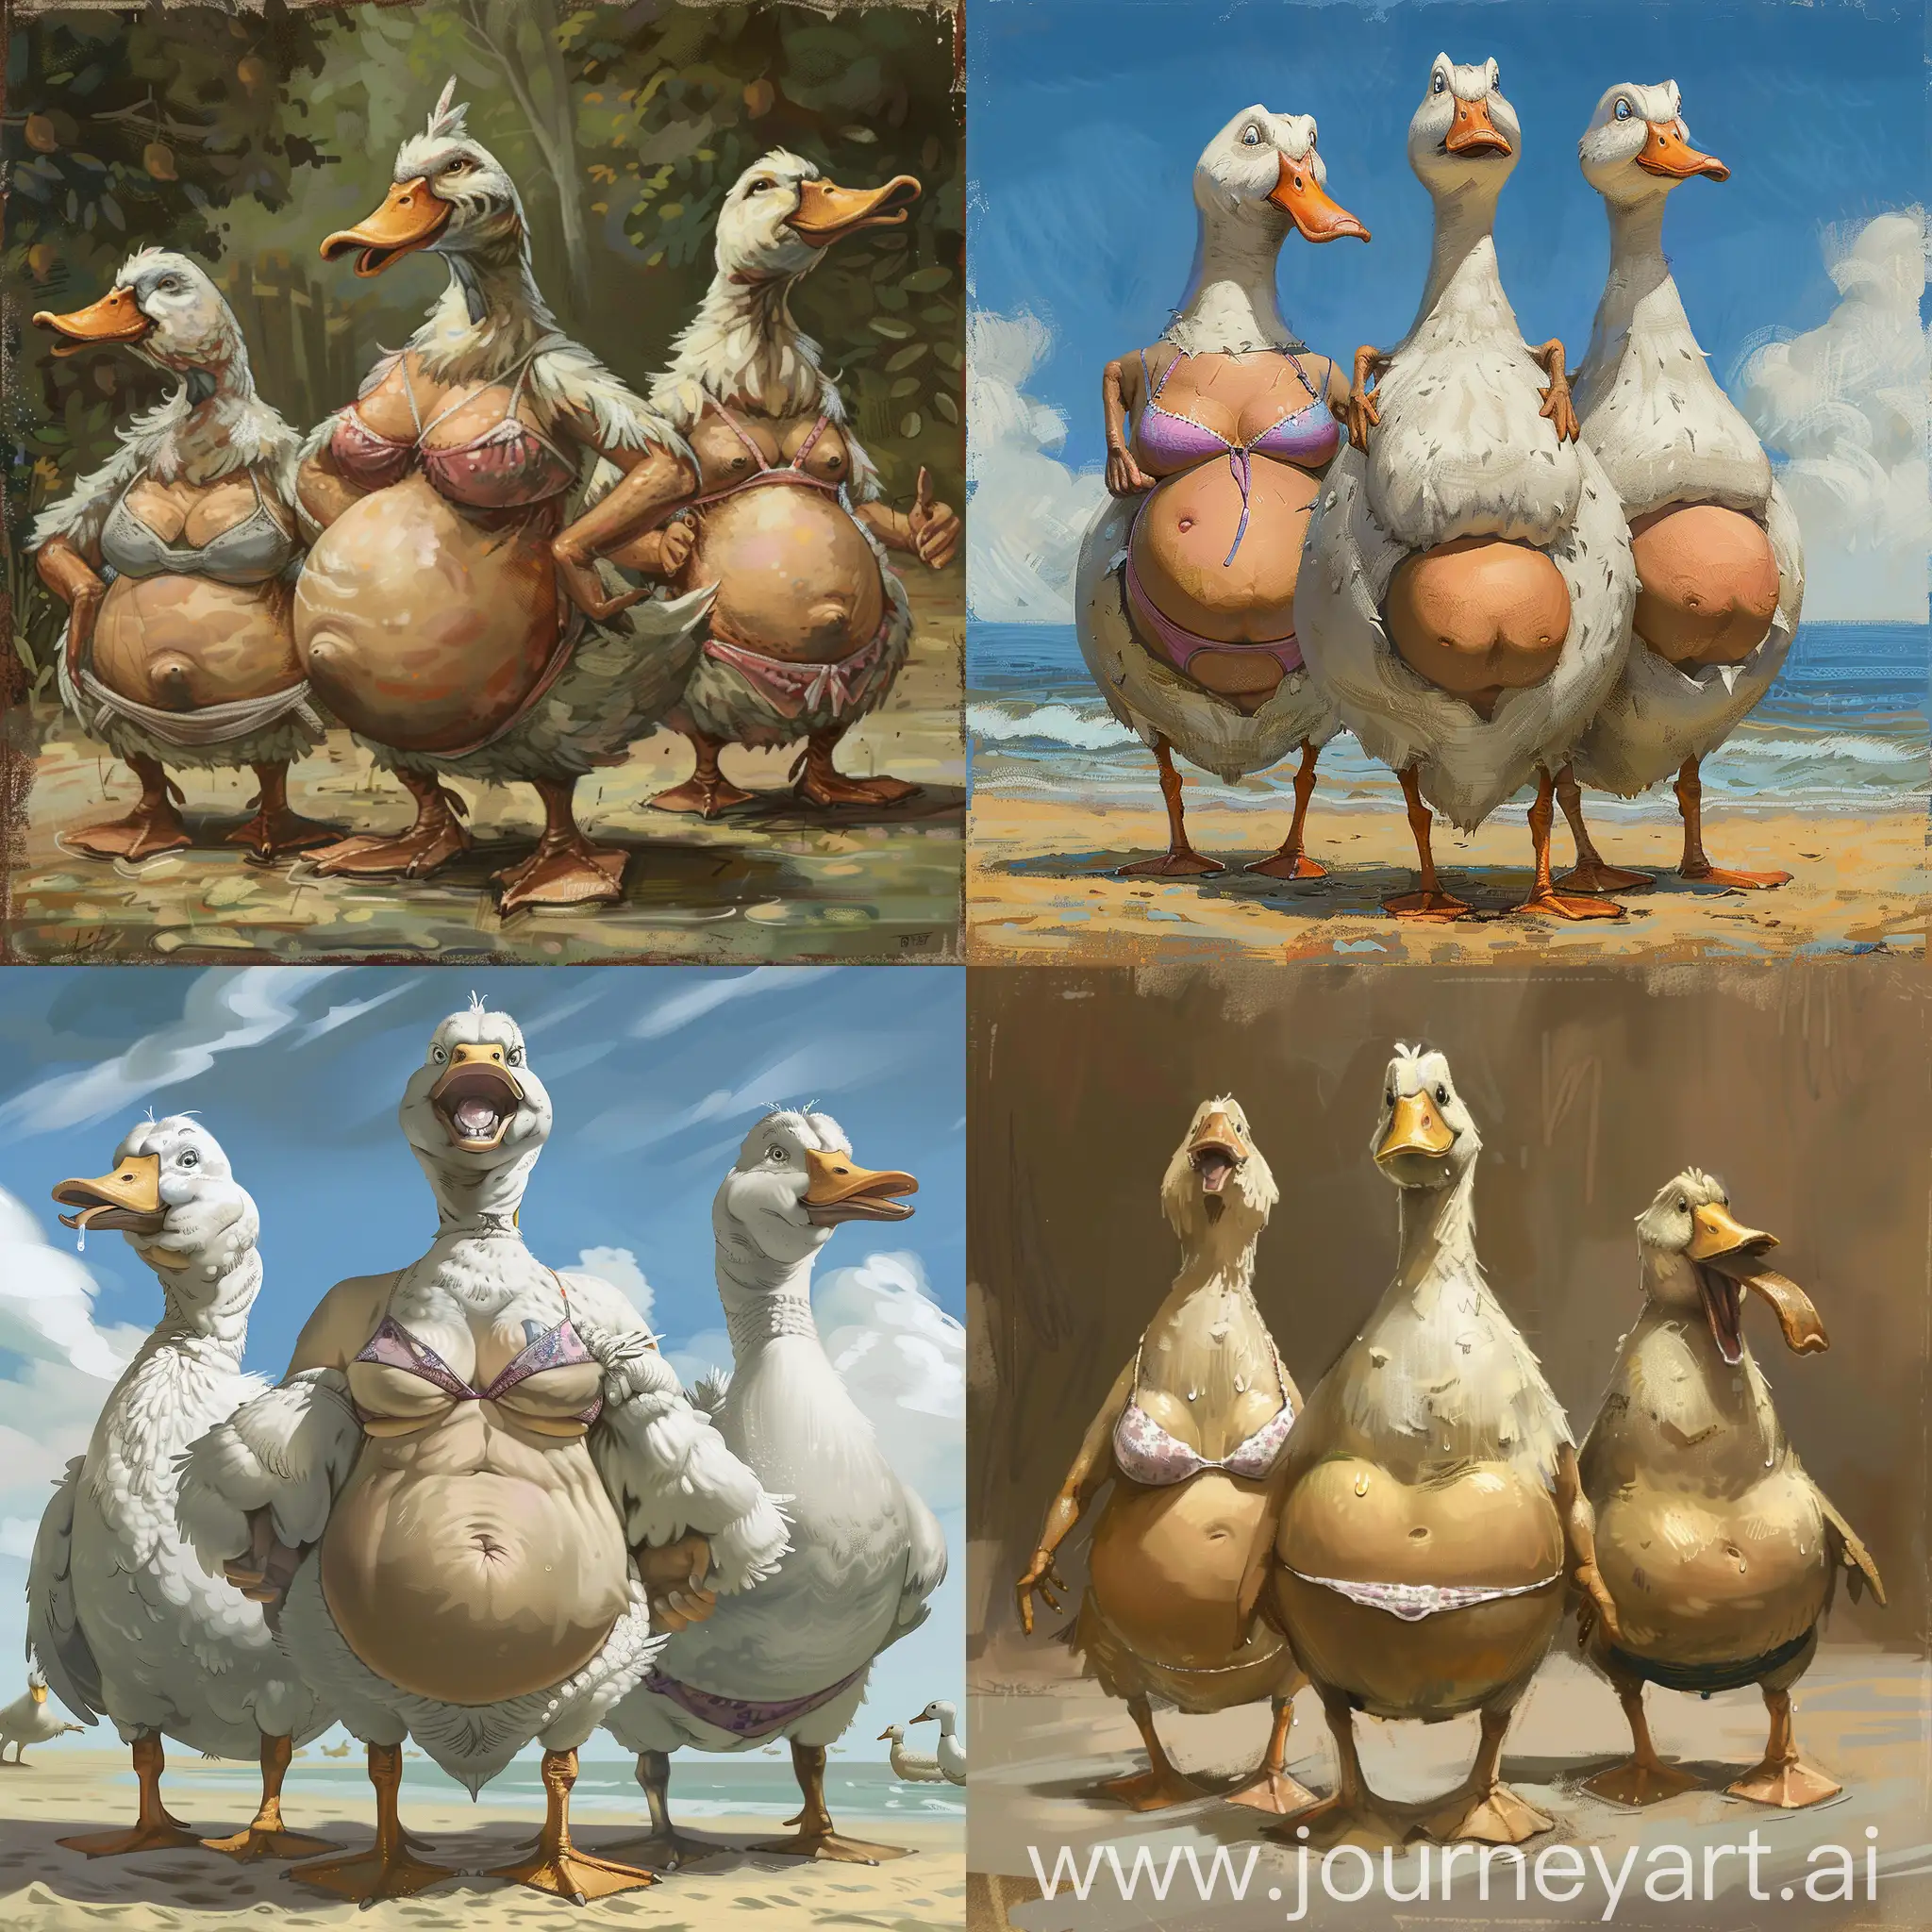 Three ducks, the two in front have exaggeratedly large bums and are jokingly wearing bikinis. The duck in the back is wearning a mankini.